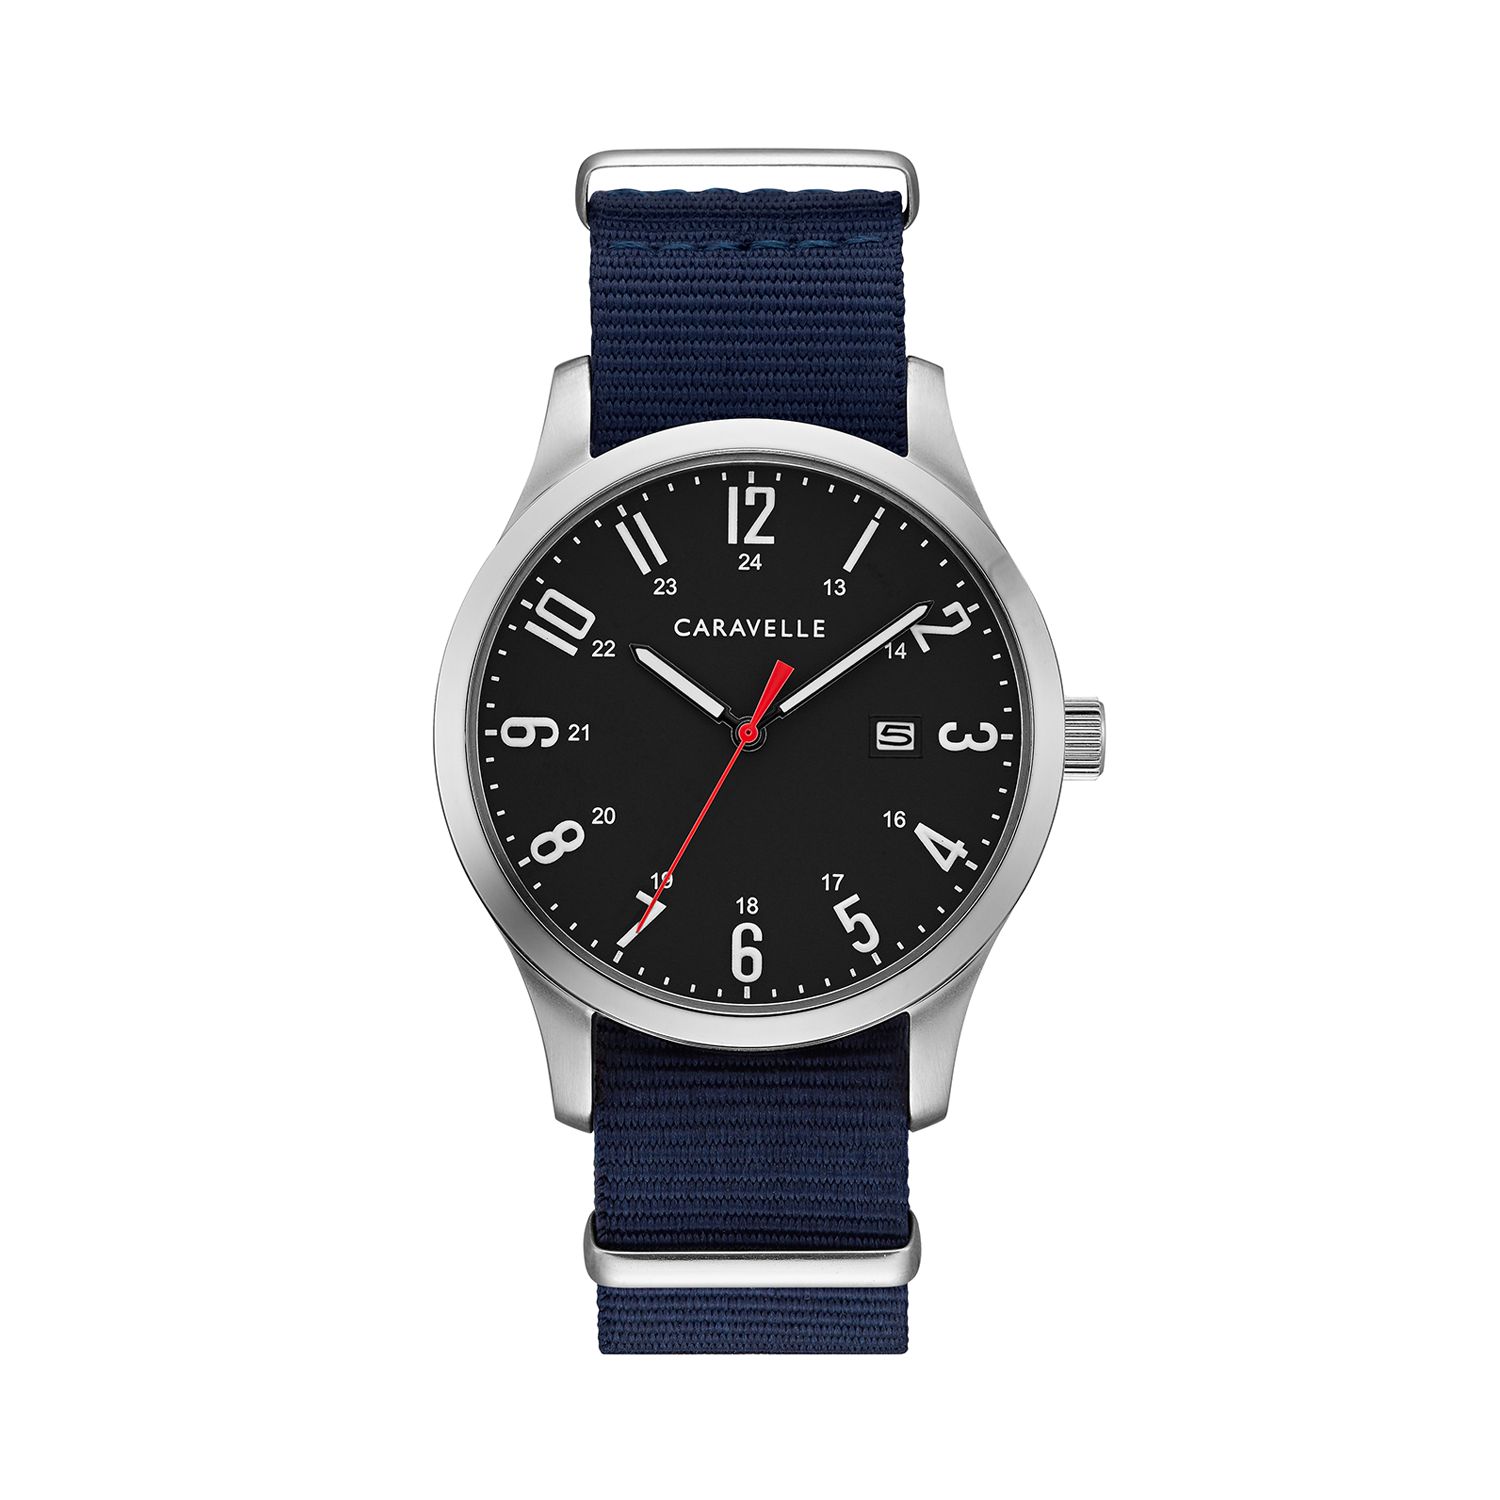 watch with interchangeable bands